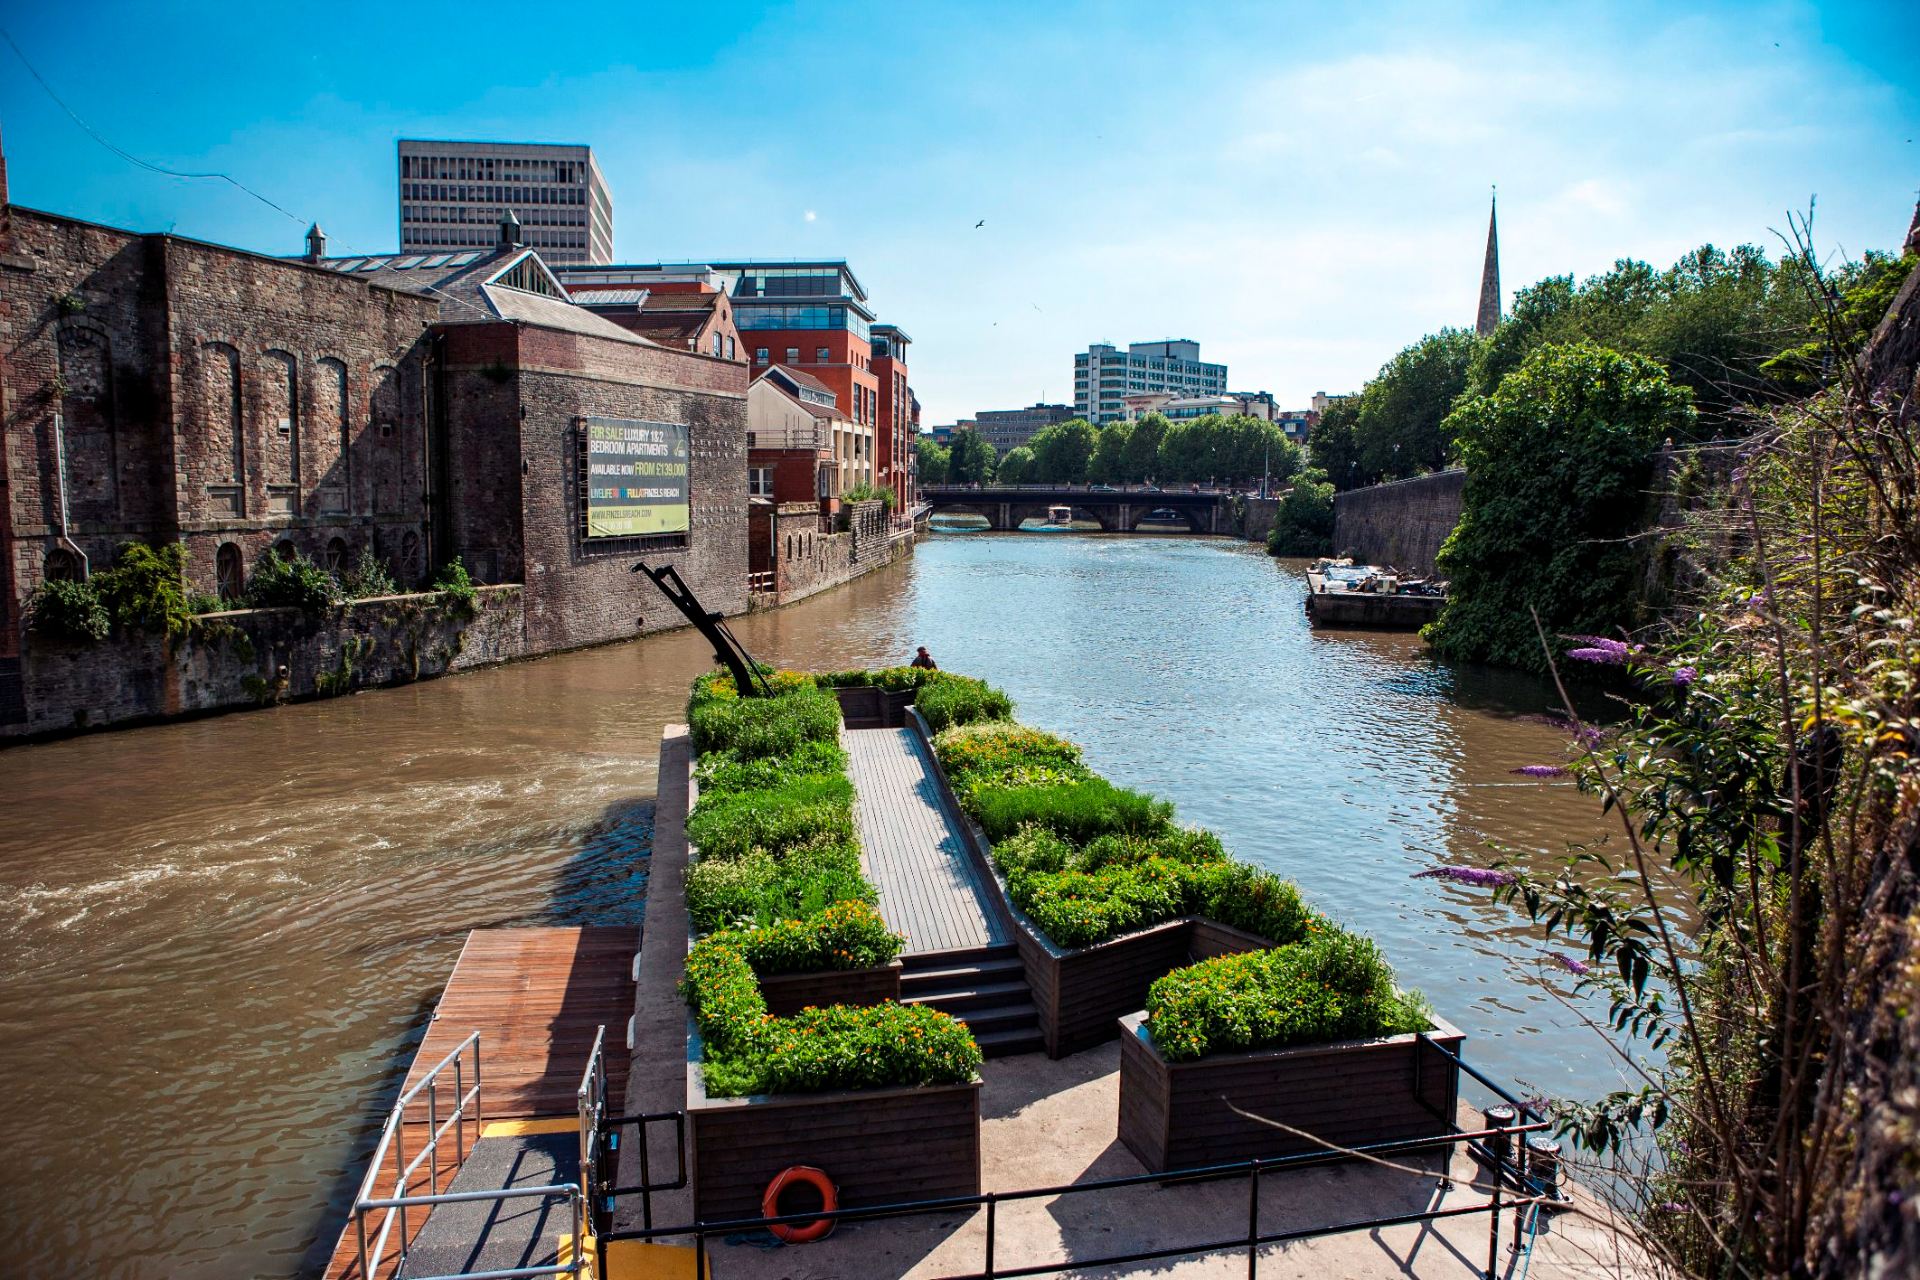 Seeds of Change: floating garden in Bristol Harbour. Artist: Maria Thereza Alvez. Photo: courtesy Arnolfini and Bristol City Council